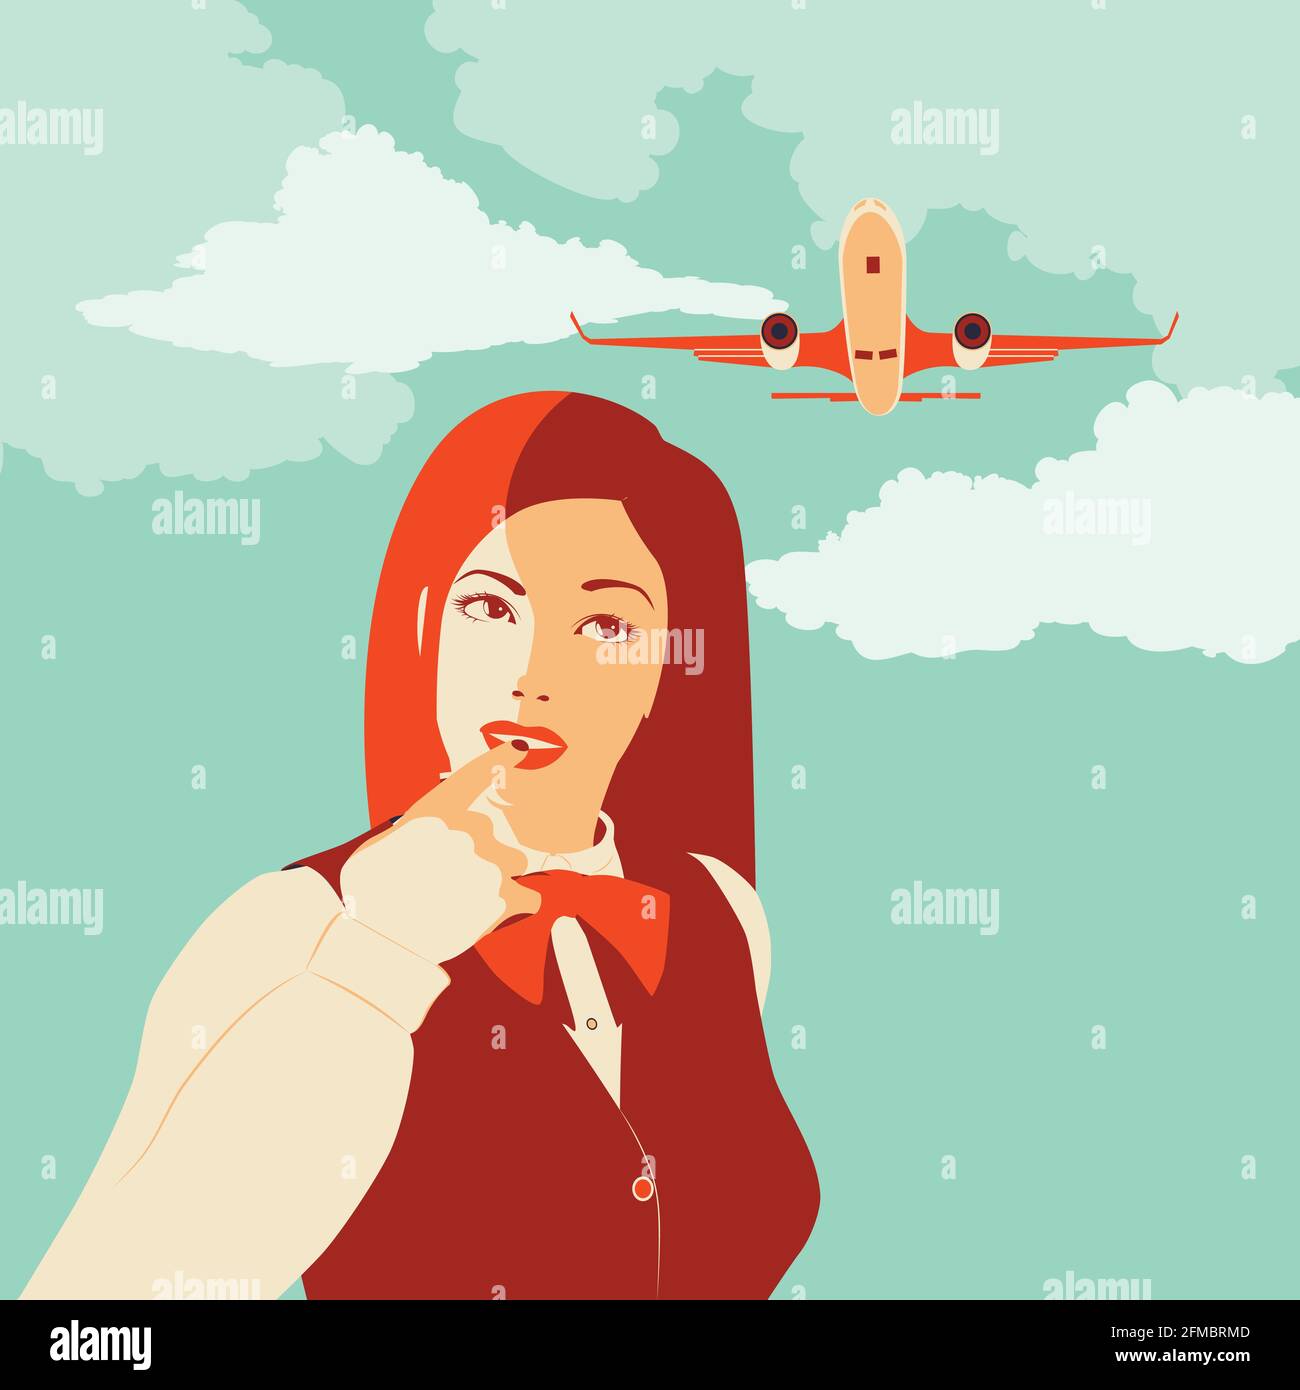 Vintage illustration with woman and airplane in the sky, traveling themed design. Stock Vector